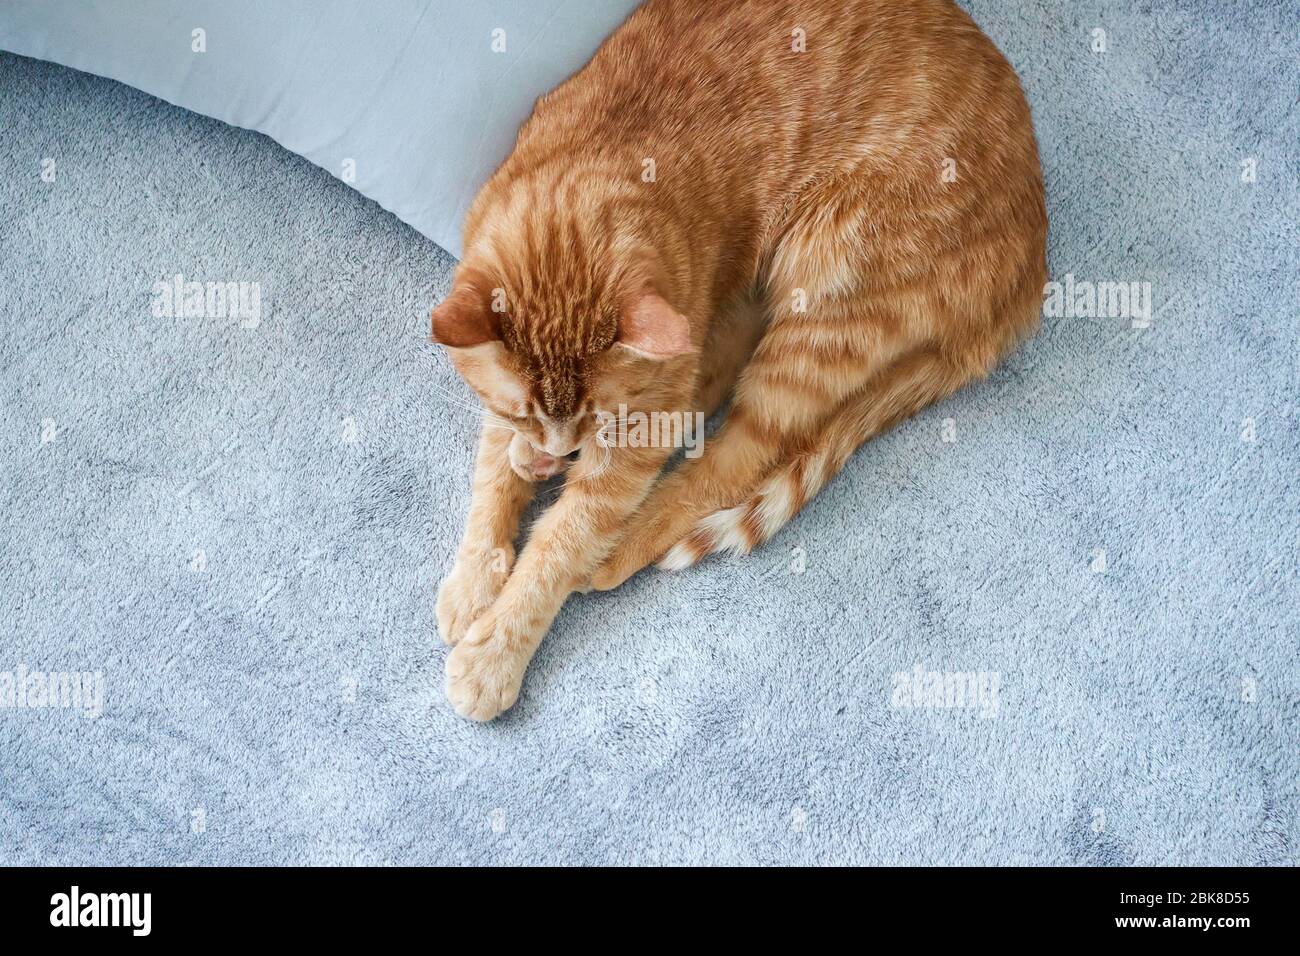 A cute lazy ginger tabby cat sleeps on a bed with gray blanket near the pillow. Unique relax or rest concept Stock Photo